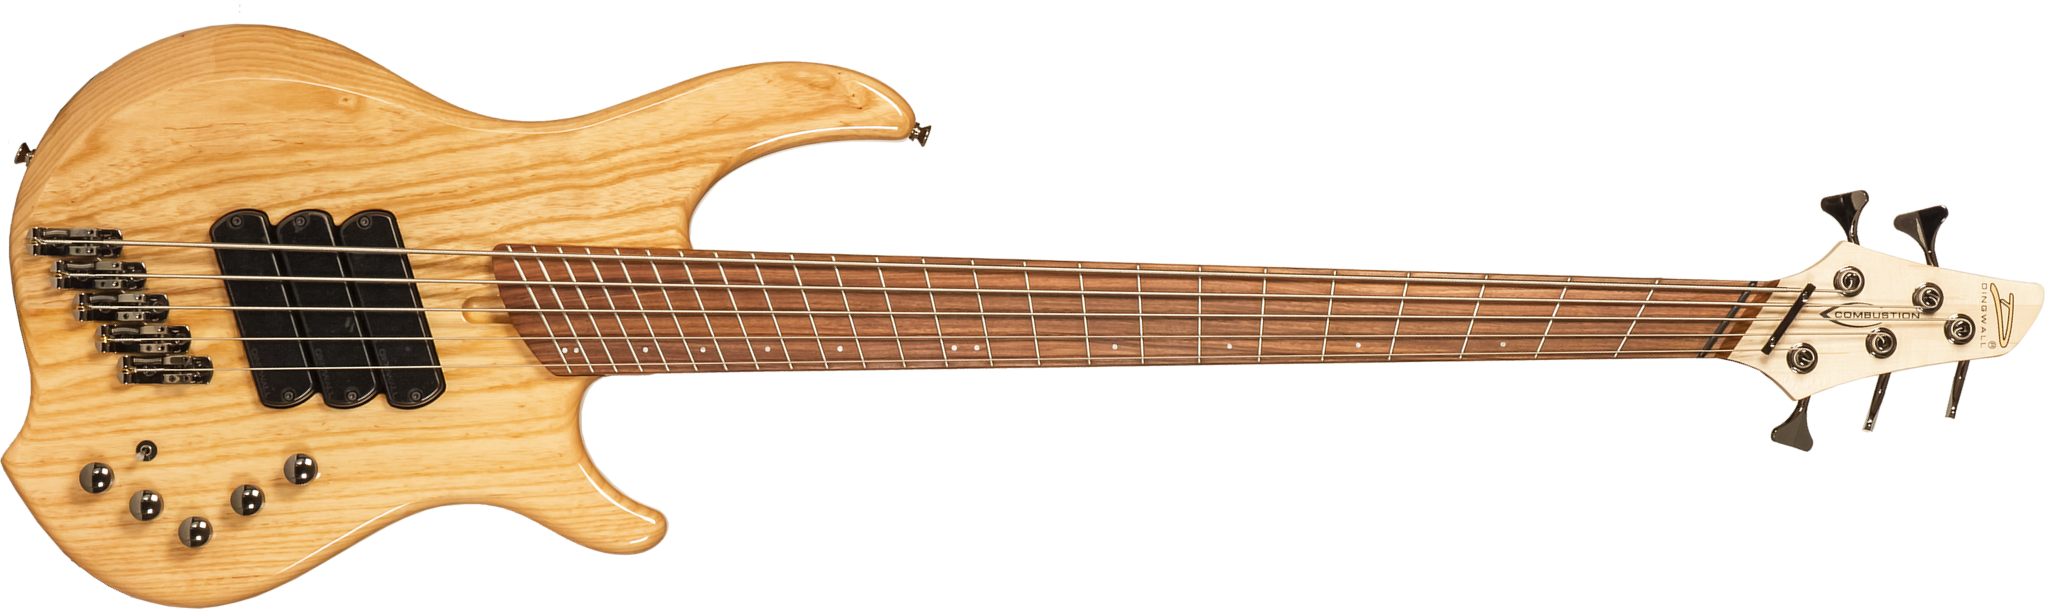 Dingwall Combustion Cb3 5c 3pu Active Pf - Natural Gloss - Solidbody E-bass - Main picture